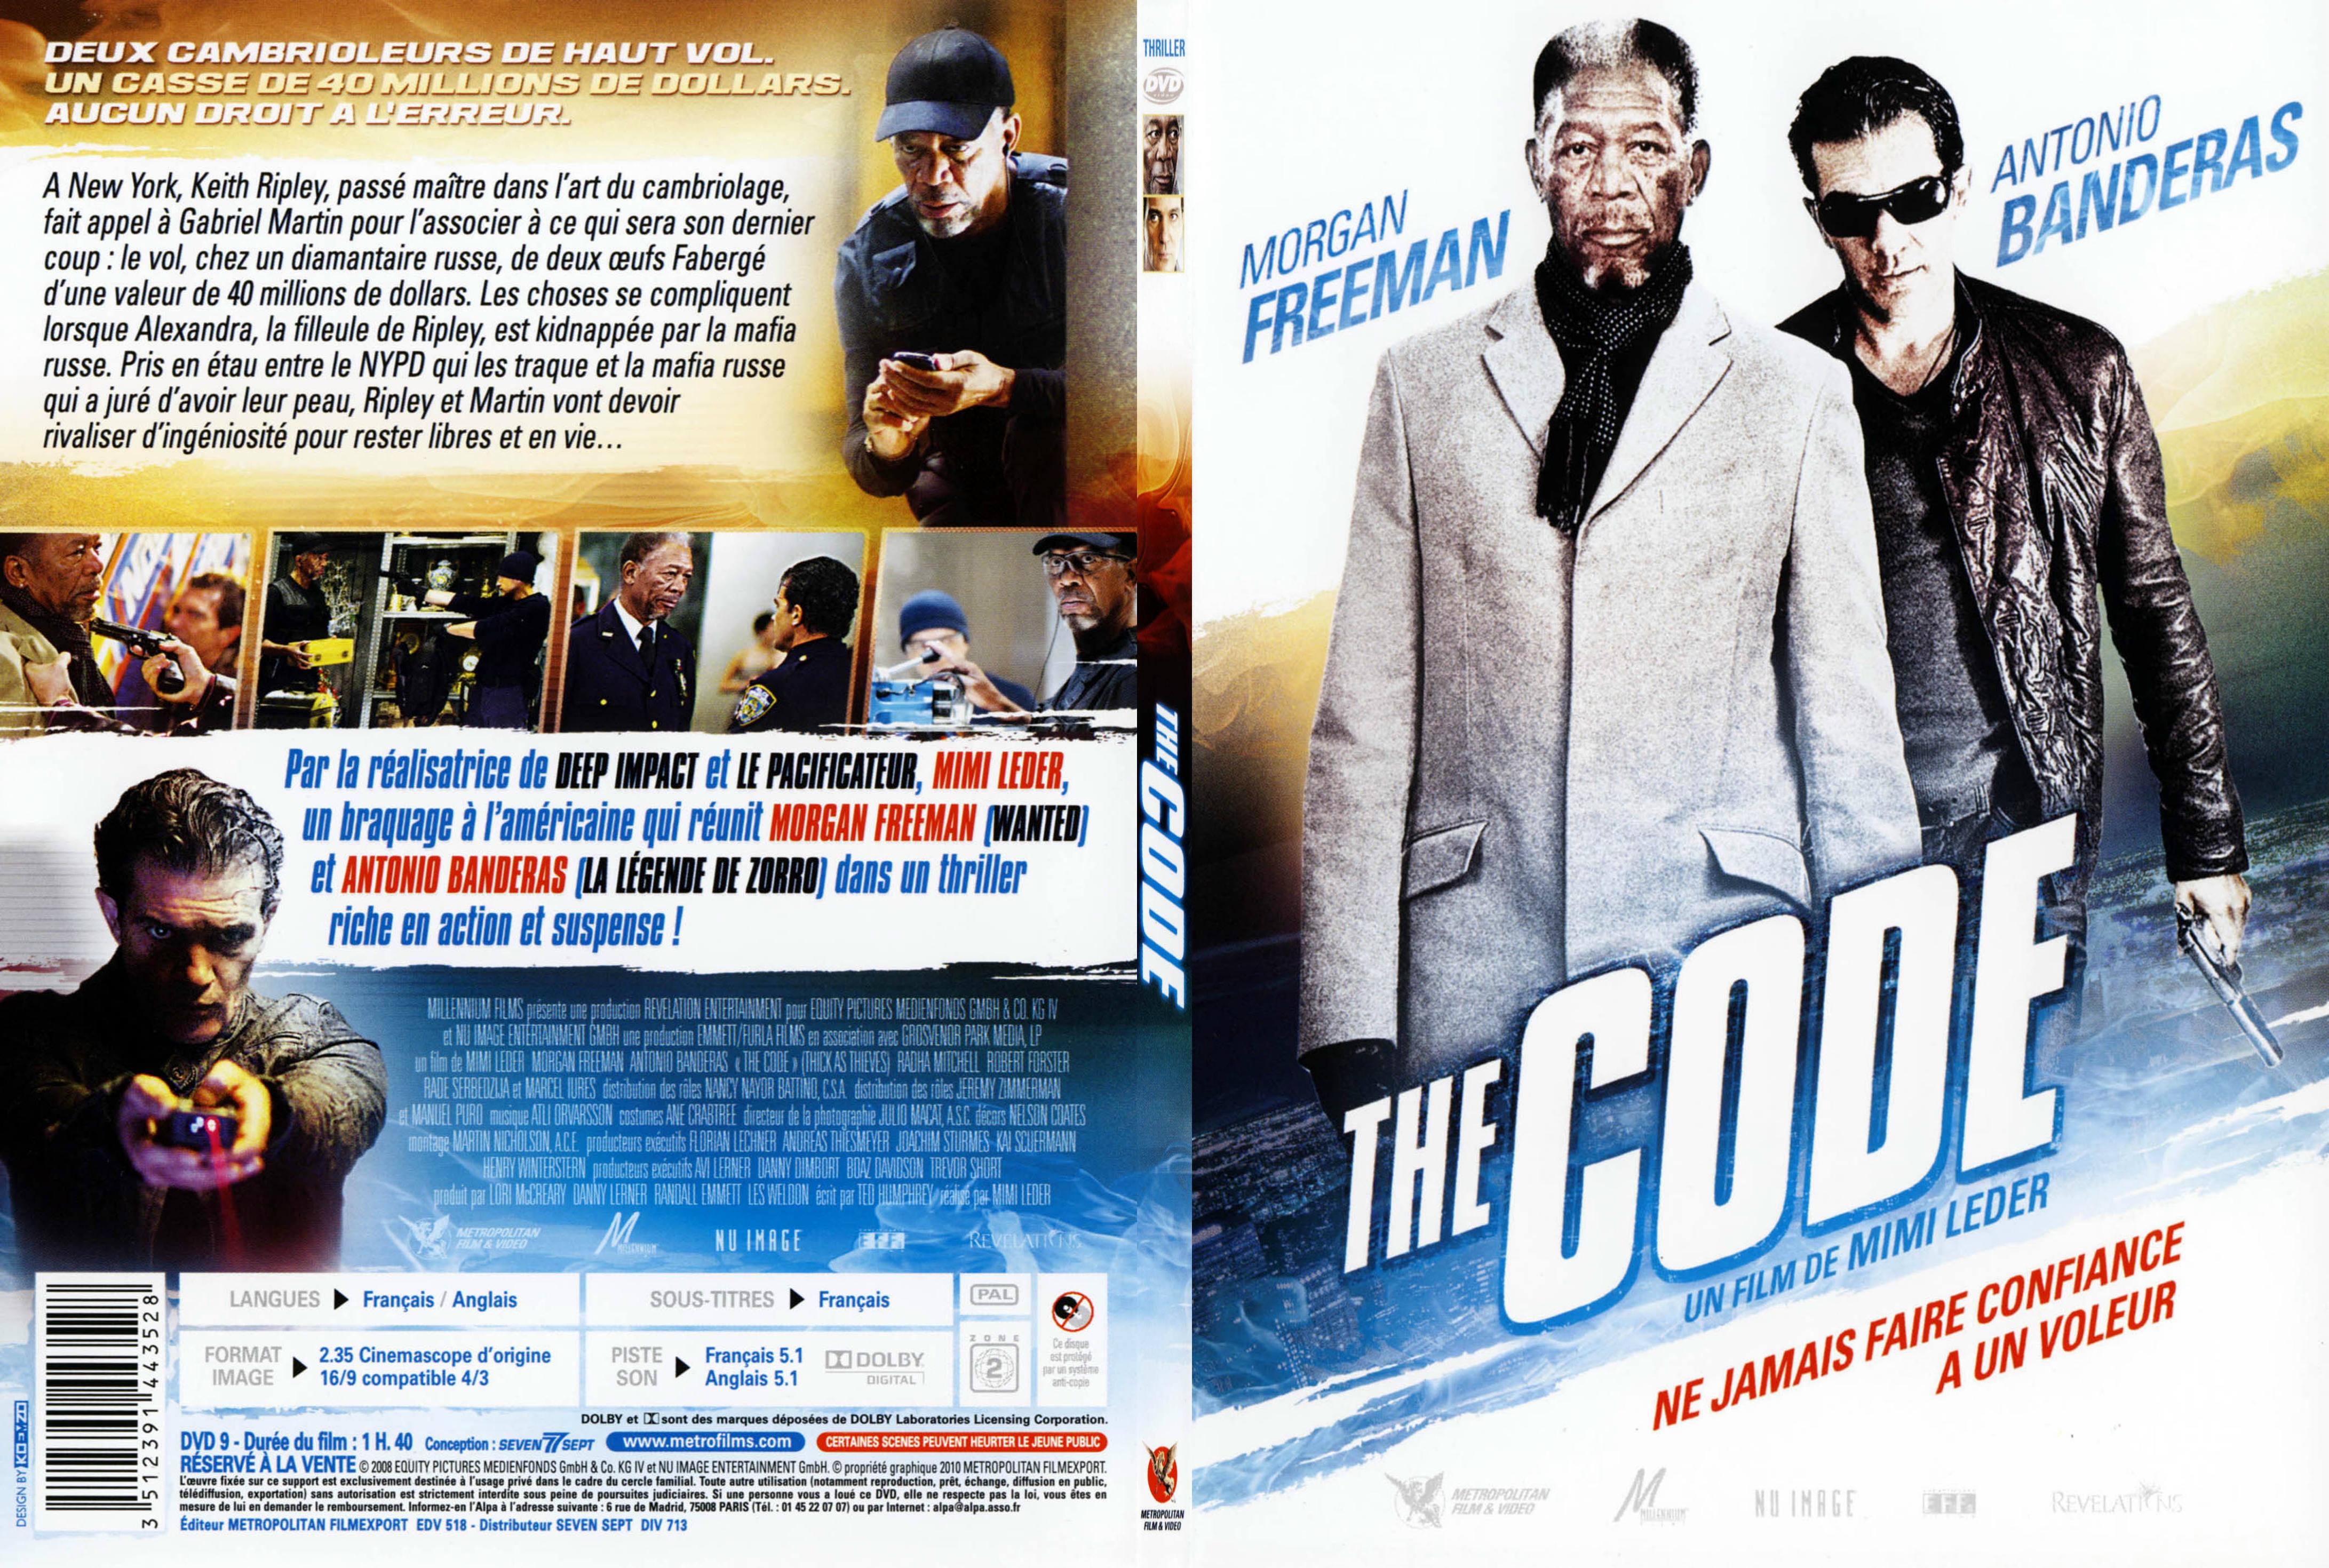 Jaquette DVD The code - SLIM